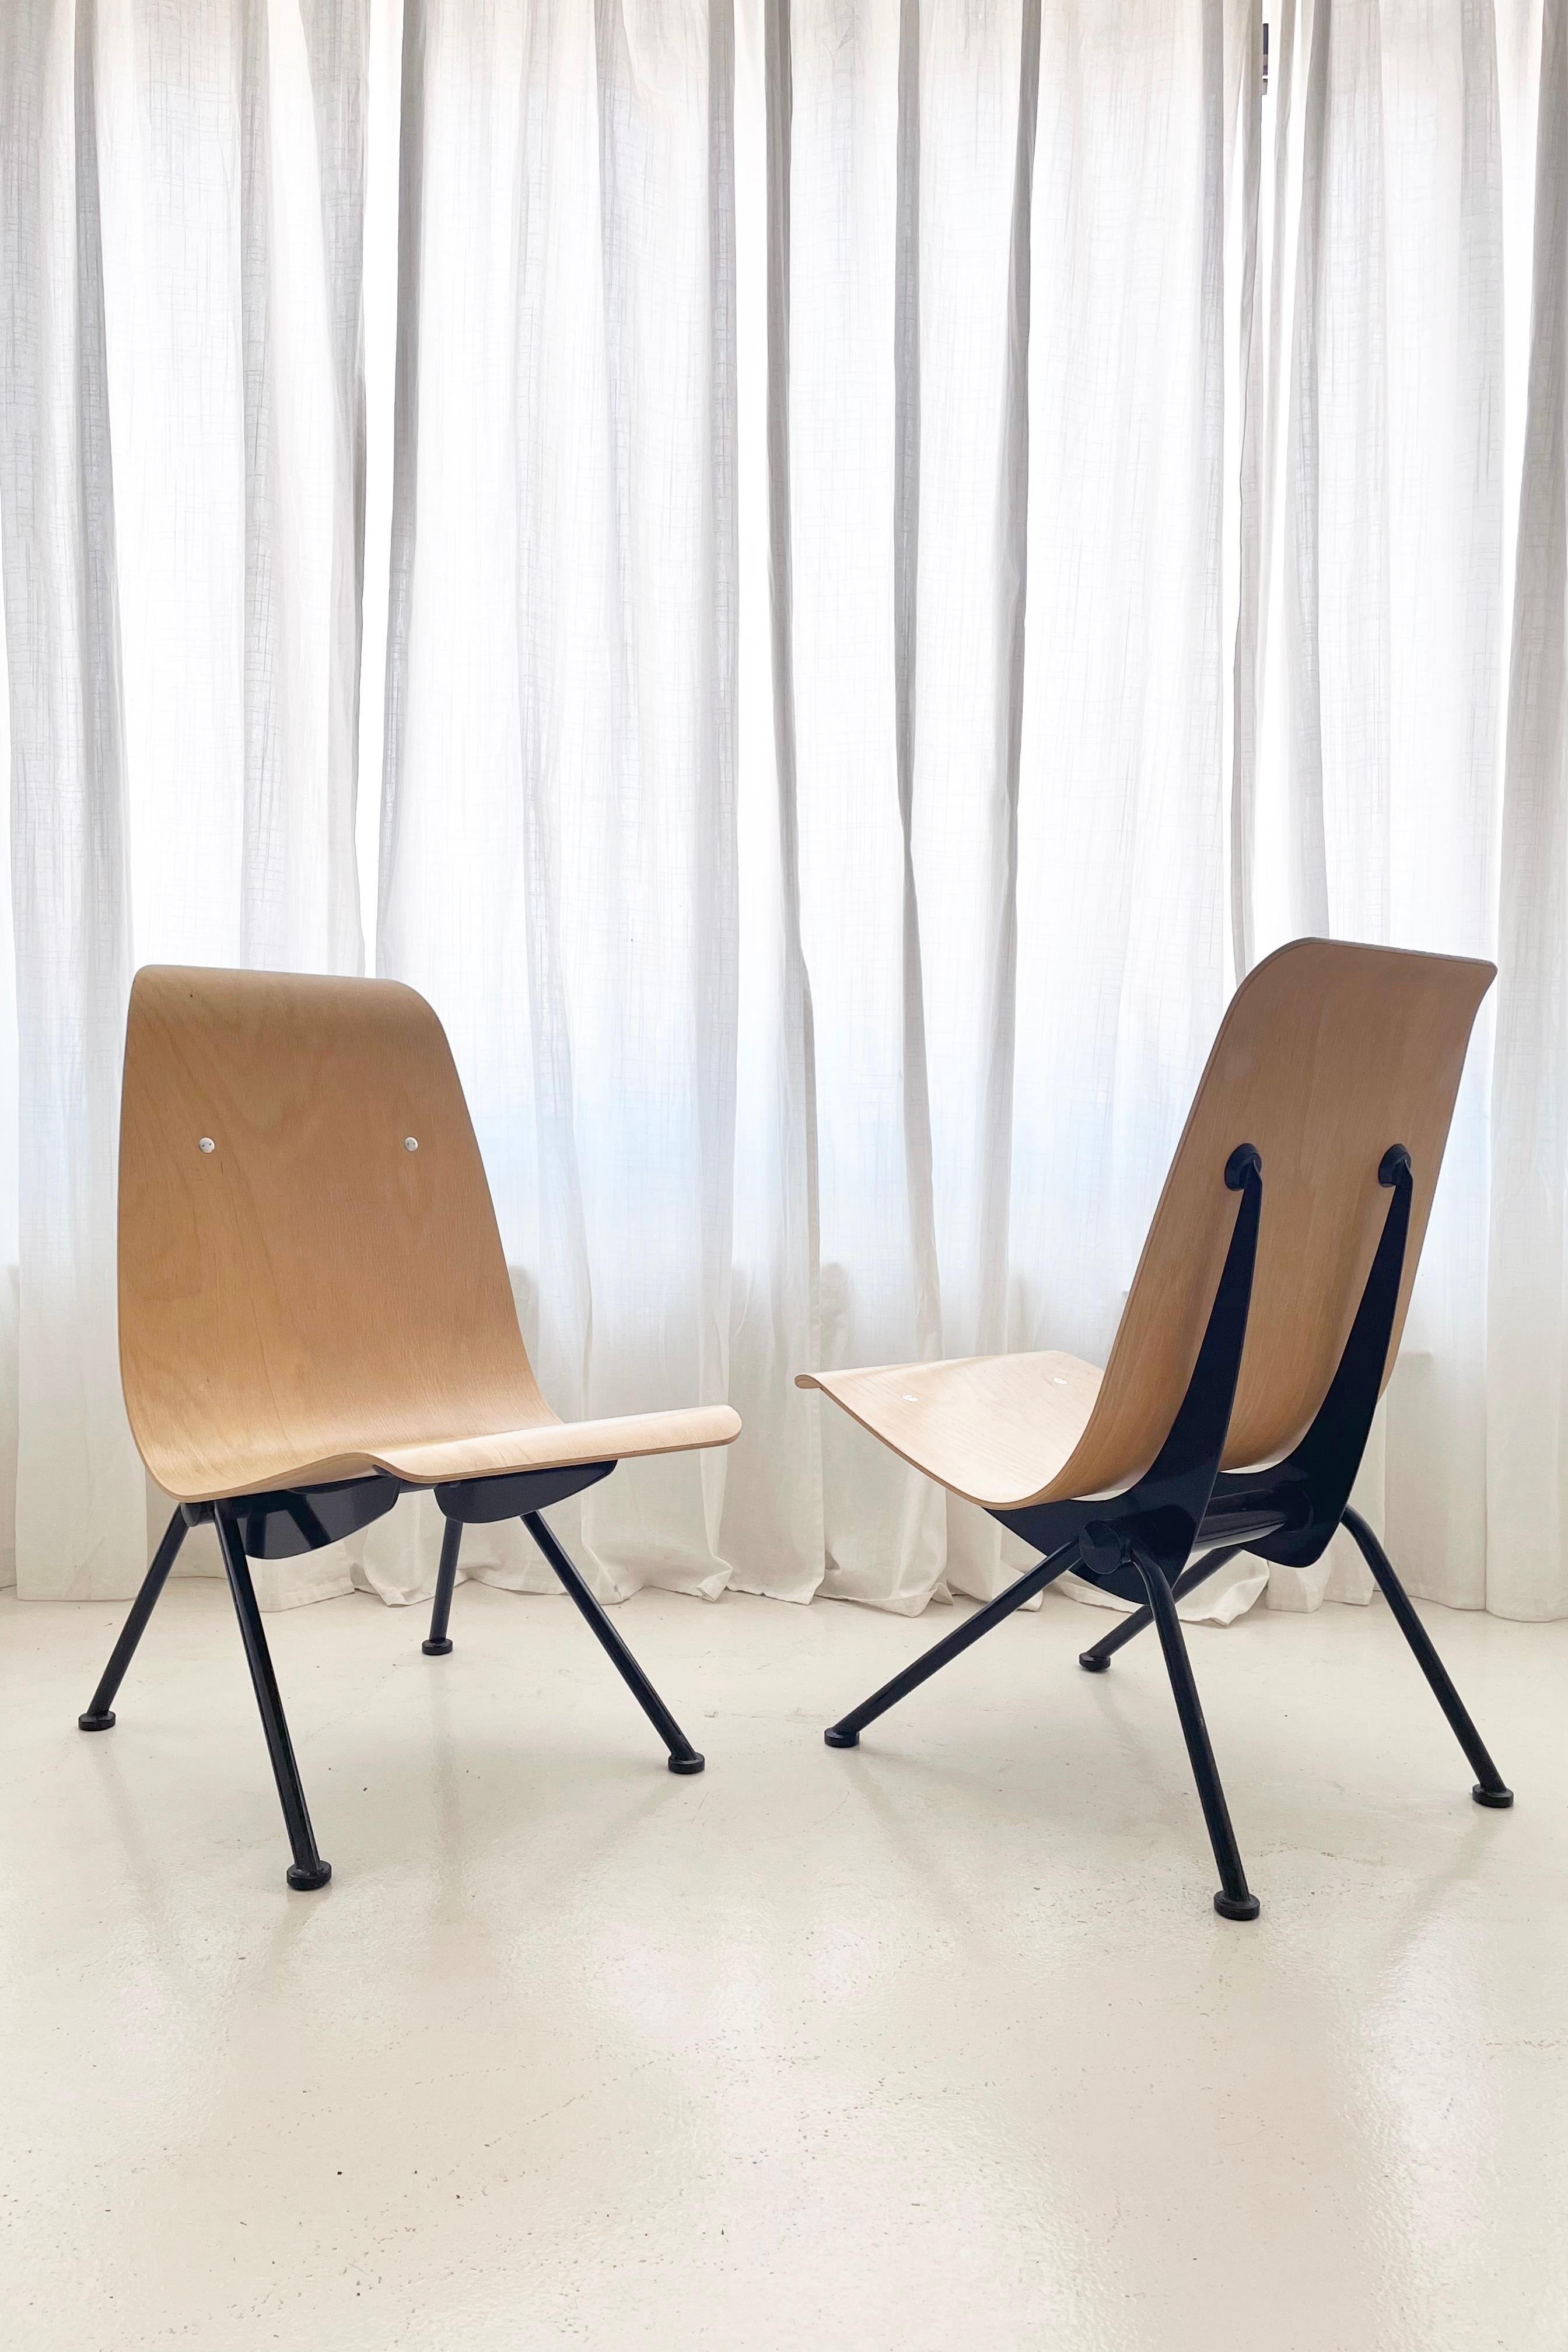 These chairs are a very sought after set of Antony Chairs originally designed in 1950 by French Architect Jean Prouvé, released via license by Vitra USA on behalf of the Prouvé family in 2002.

The chairs were re-released in a limited number and are